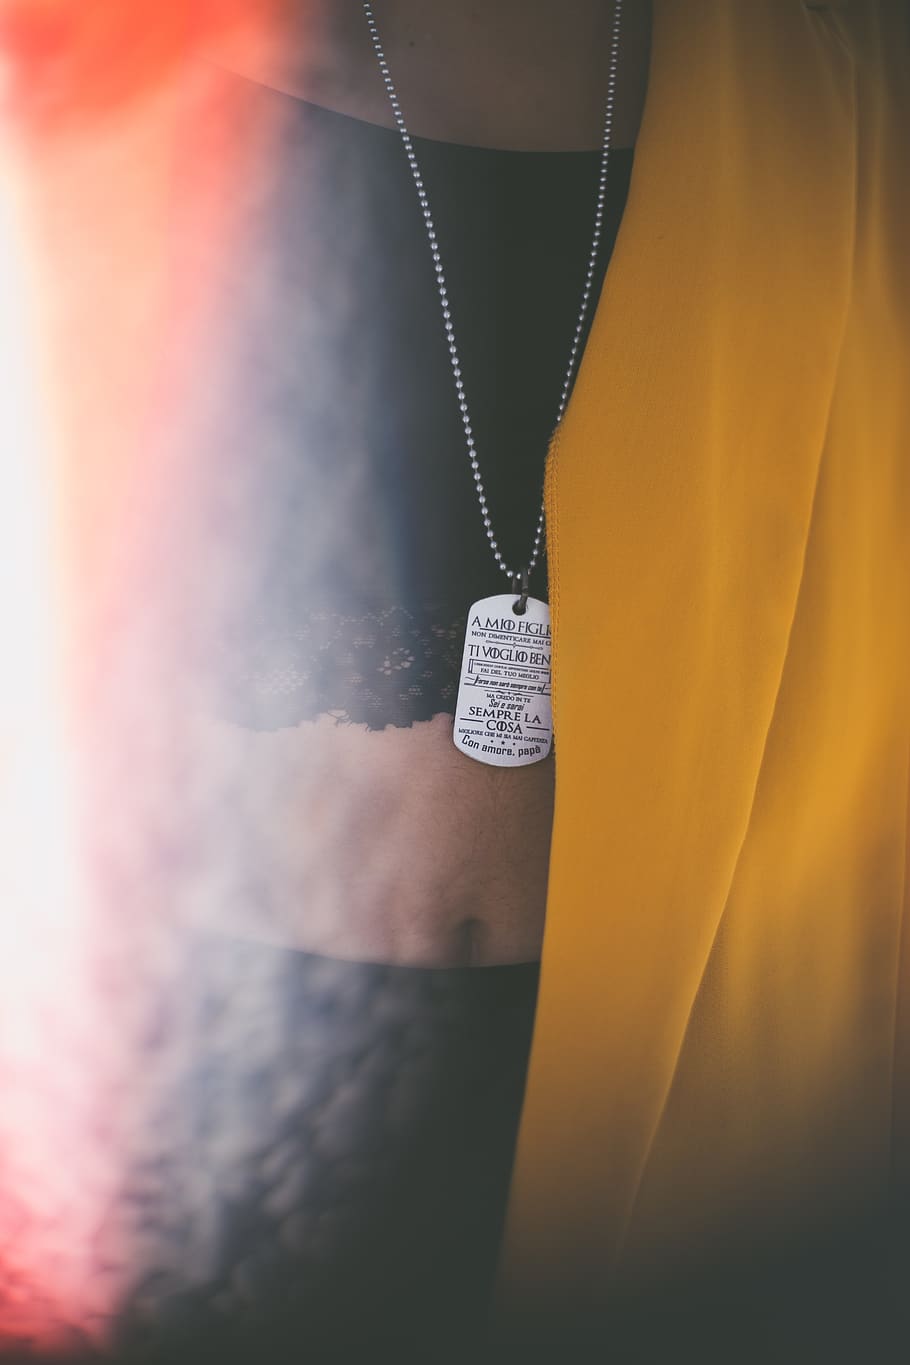 HD wallpaper: person wearing gray dog tag pendant, human, #art #love  #beautiful #photography #instagood #fashion #photooftheday #photo  #instagram #follow #beauty #artist #like #picoftheday #drawing #design  #model #happy #graphicdesign #style ...